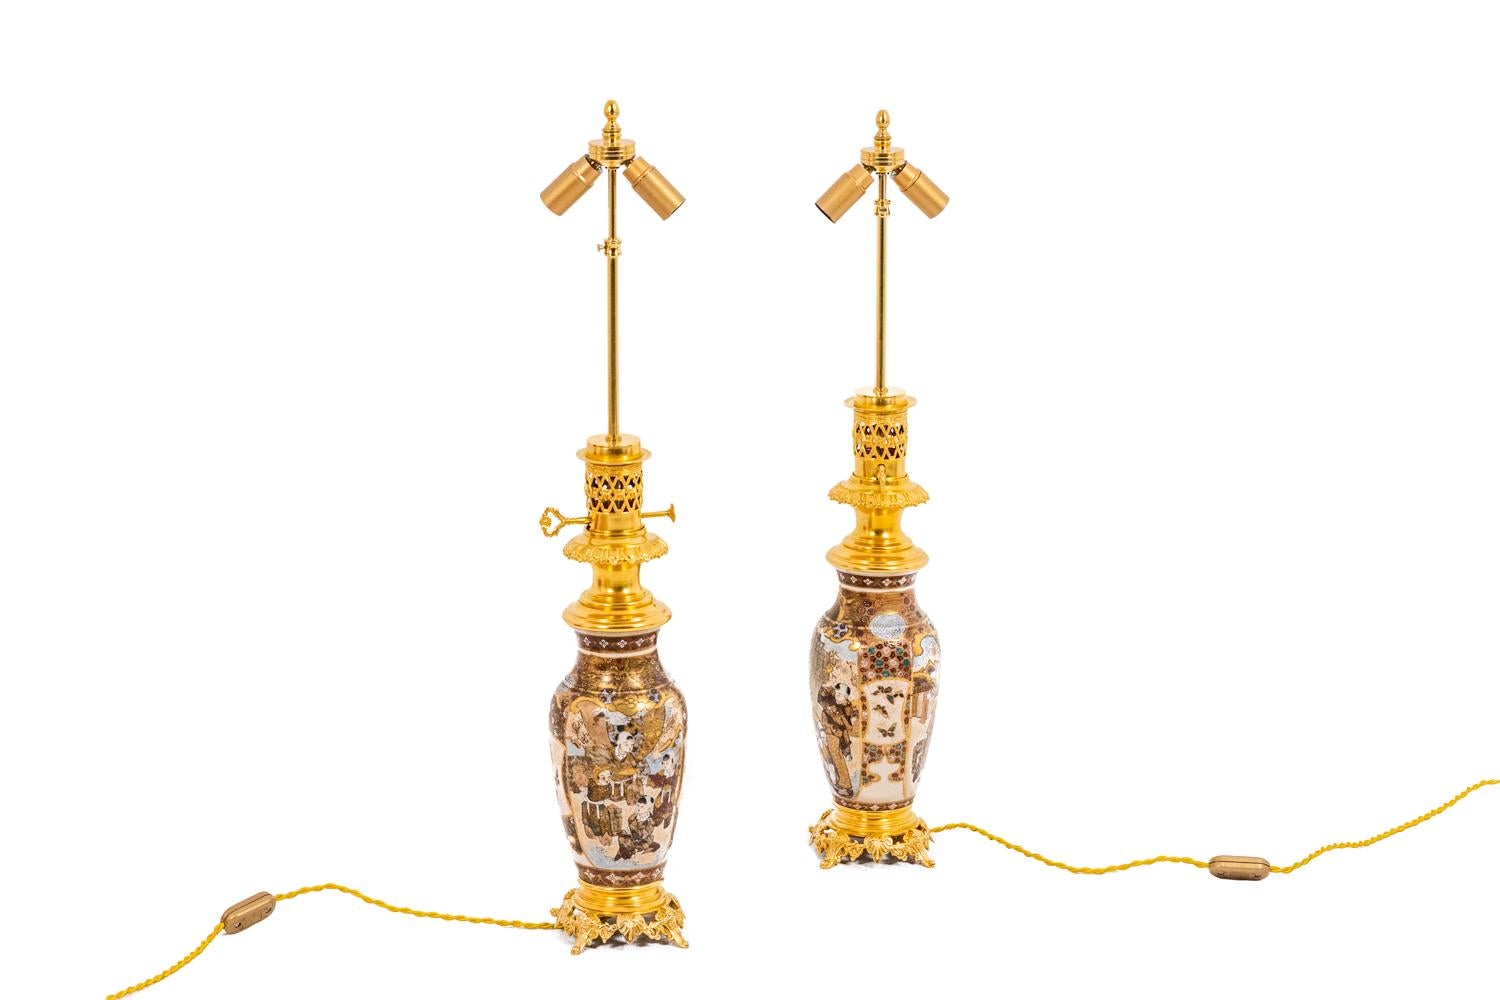 Pair of fine Satsuma earthenware lamps predominantly gold and gilded bronze. Ovoid shape surmounted by a neck in white cartouches on a gold background, adorned with butterflies and children. Openwork and gilded bronzes in an eclectic